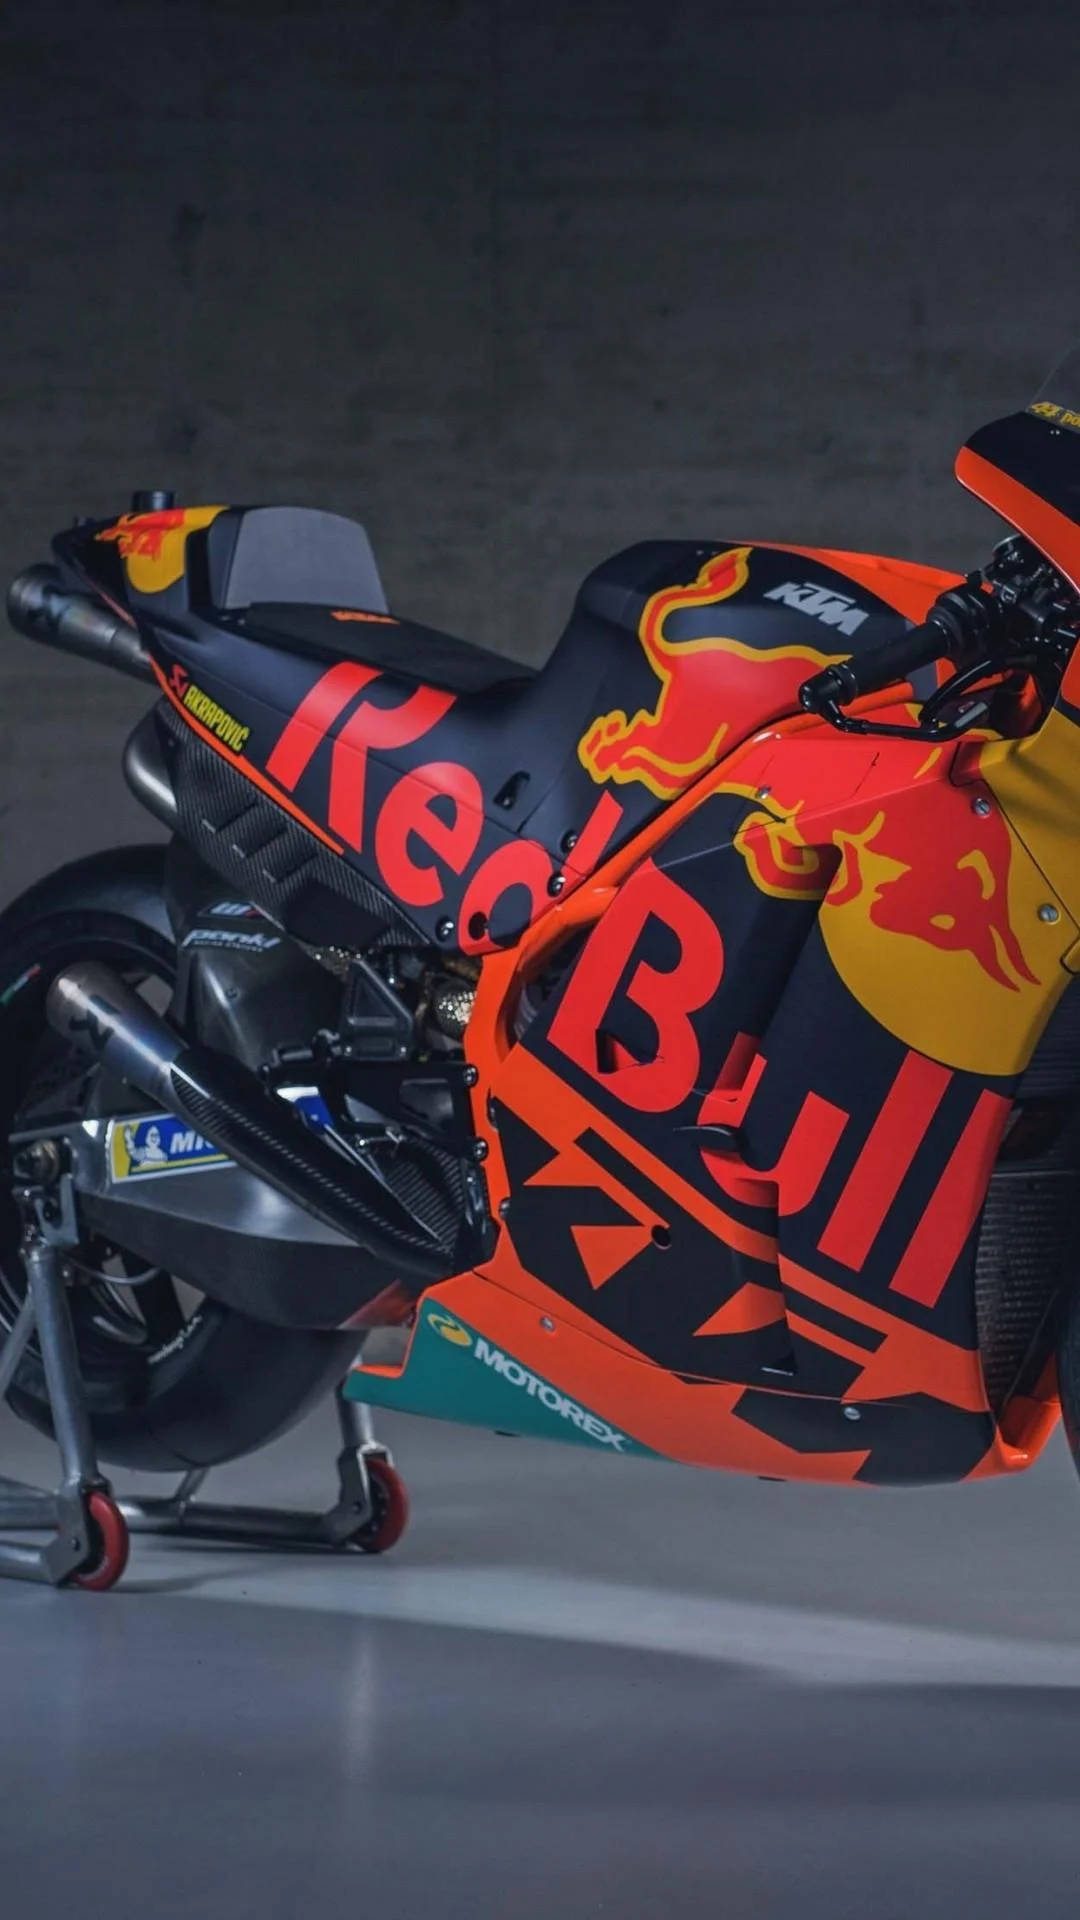 Caption: "Revved Up with Red Bull - KTM iPhone Wallpaper" Wallpaper